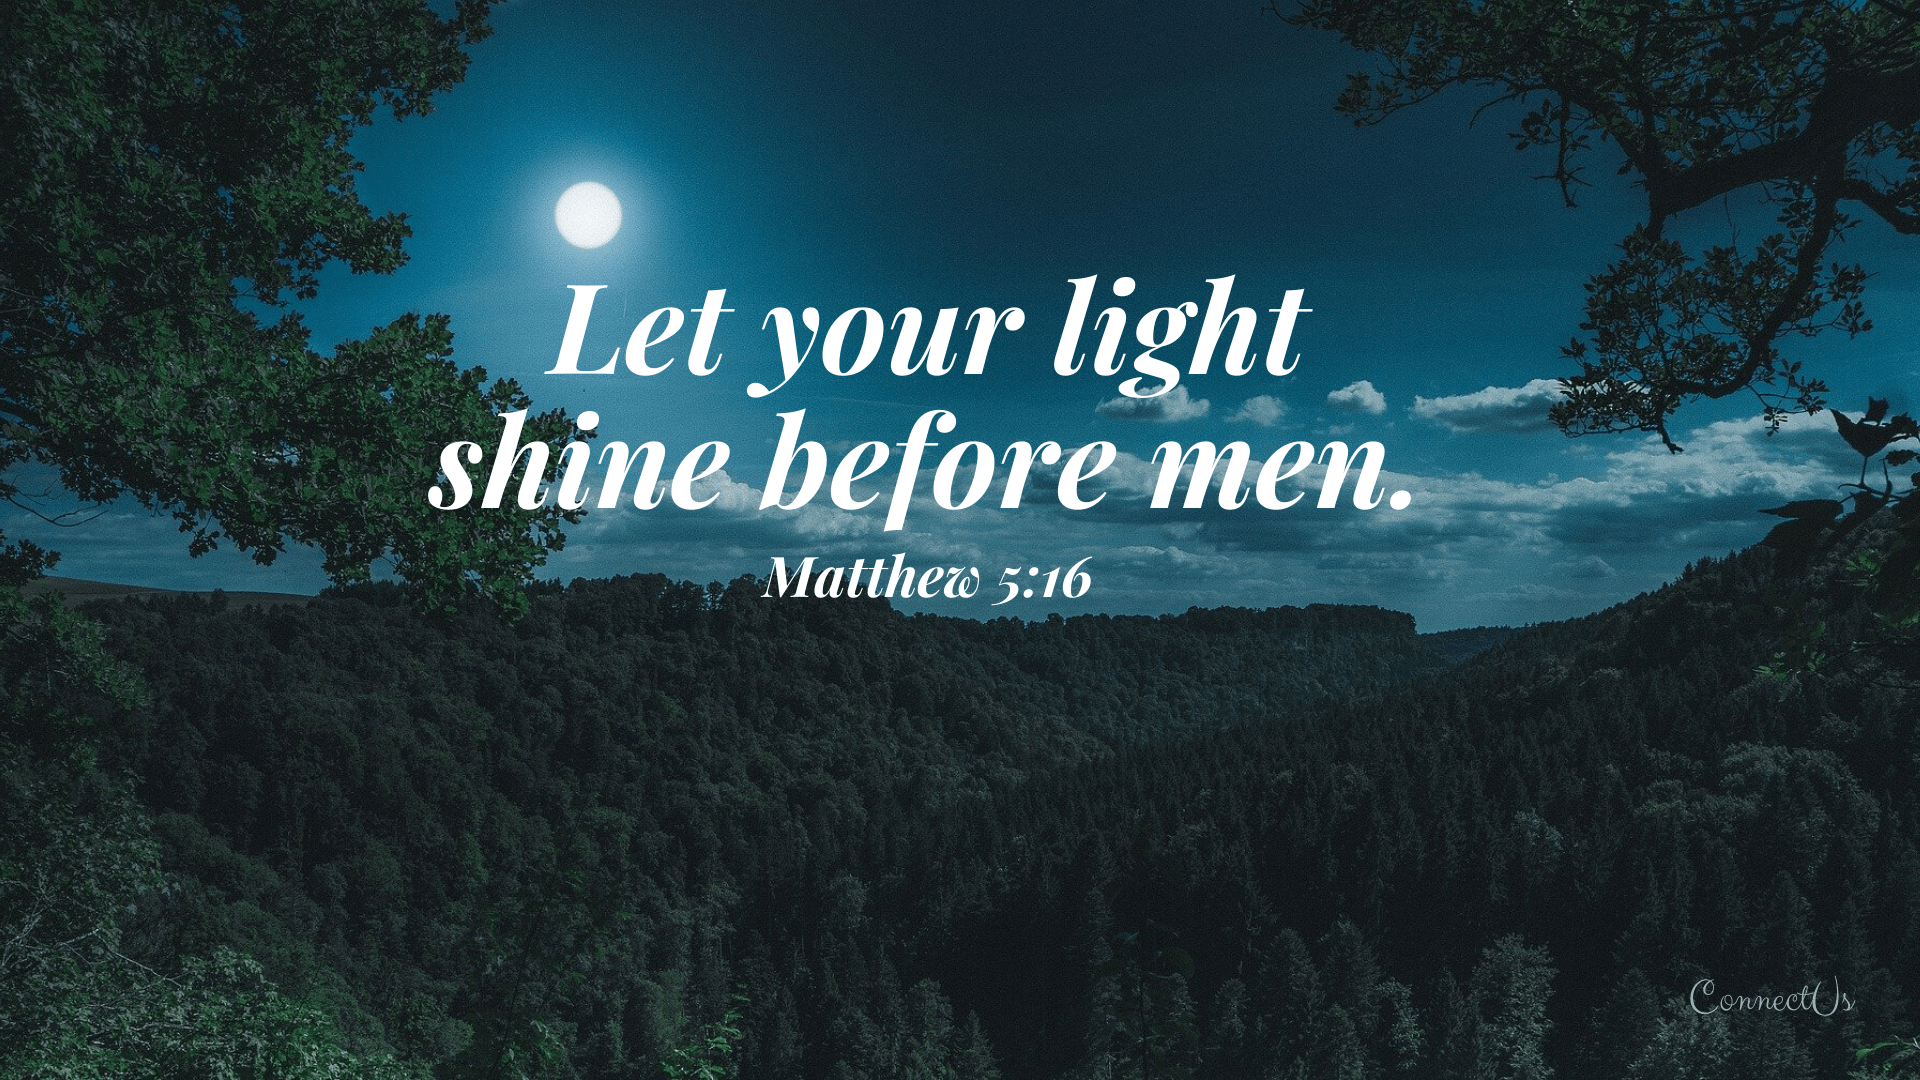 A quote from the bible that says let your light shine before men - Bible